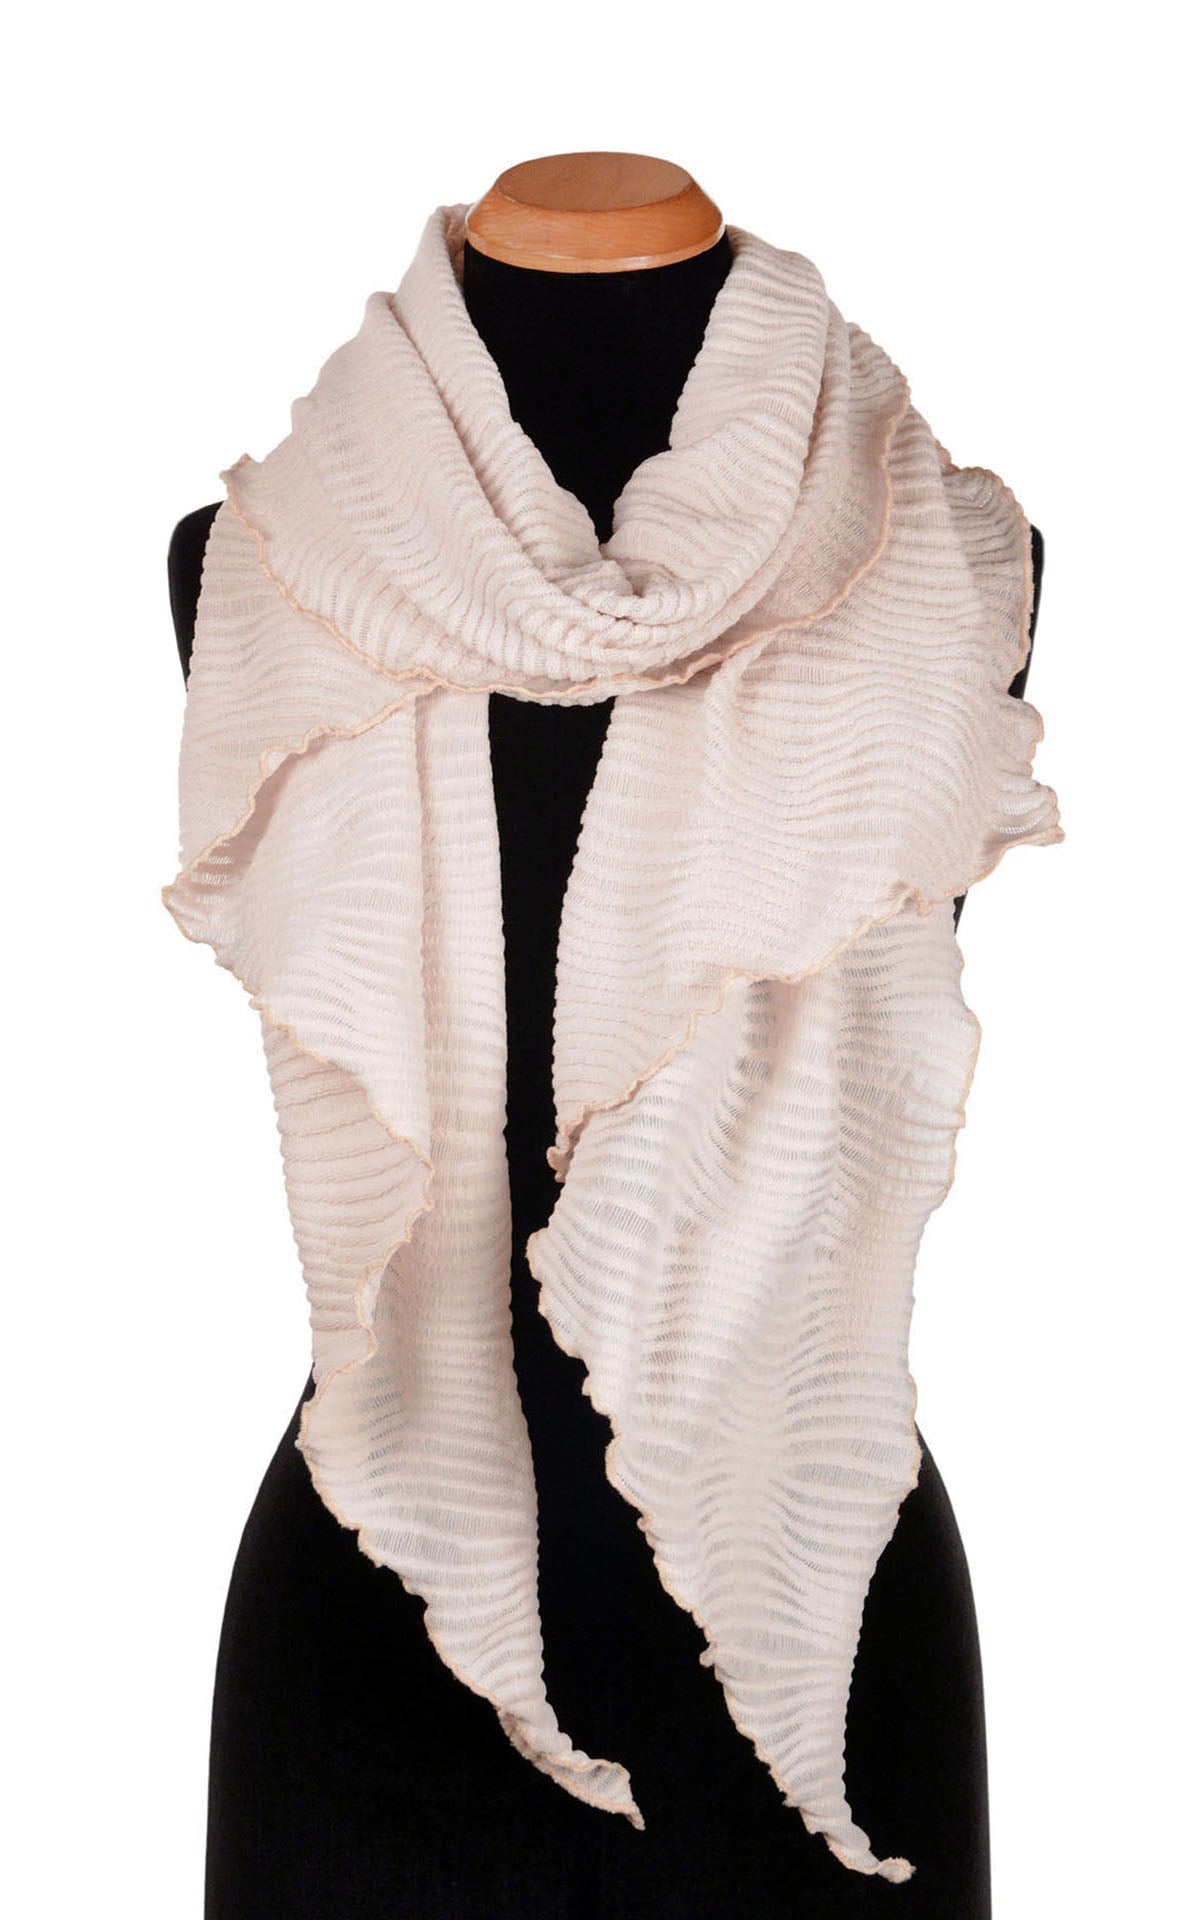 Handkerchief Scarf in Blush from the Pandemonium Seattle Fractal Collection. Shown wrapped loosely on product model. LYC by Pandemonium is handmade in Seattle, WA, USA.